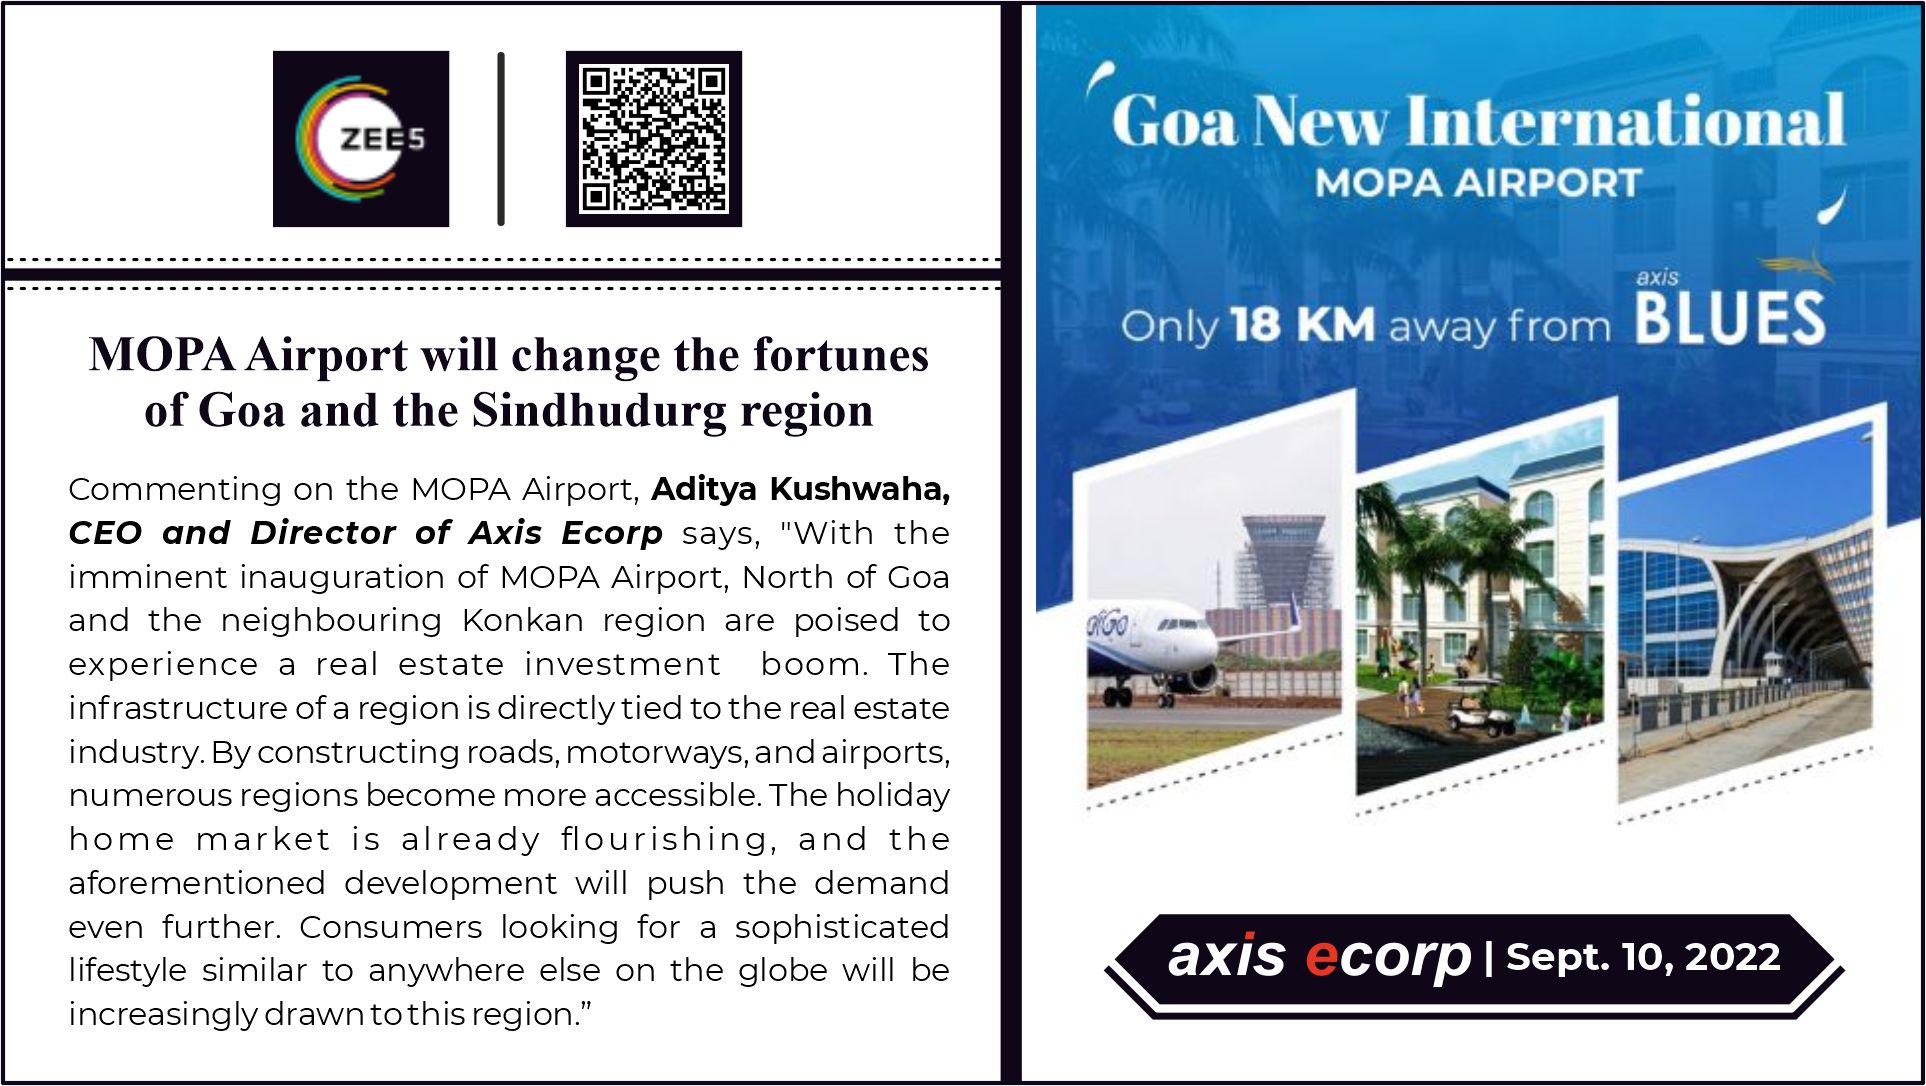 MOPA Airport will change the fortunes of Goa